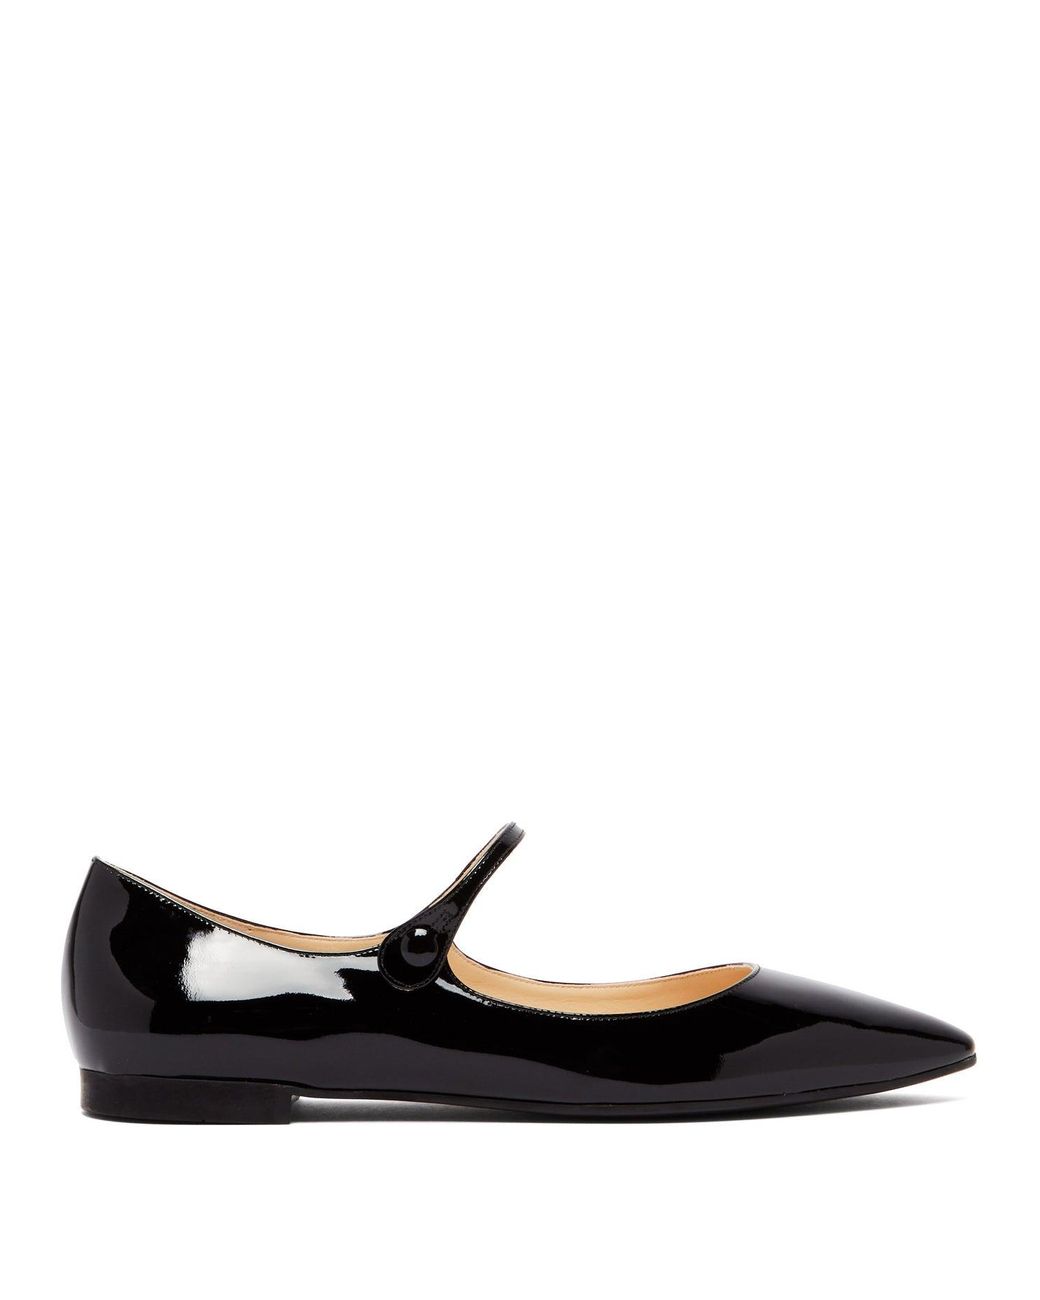 Prada Patent-leather Mary-jane Flats in Black | Lyst